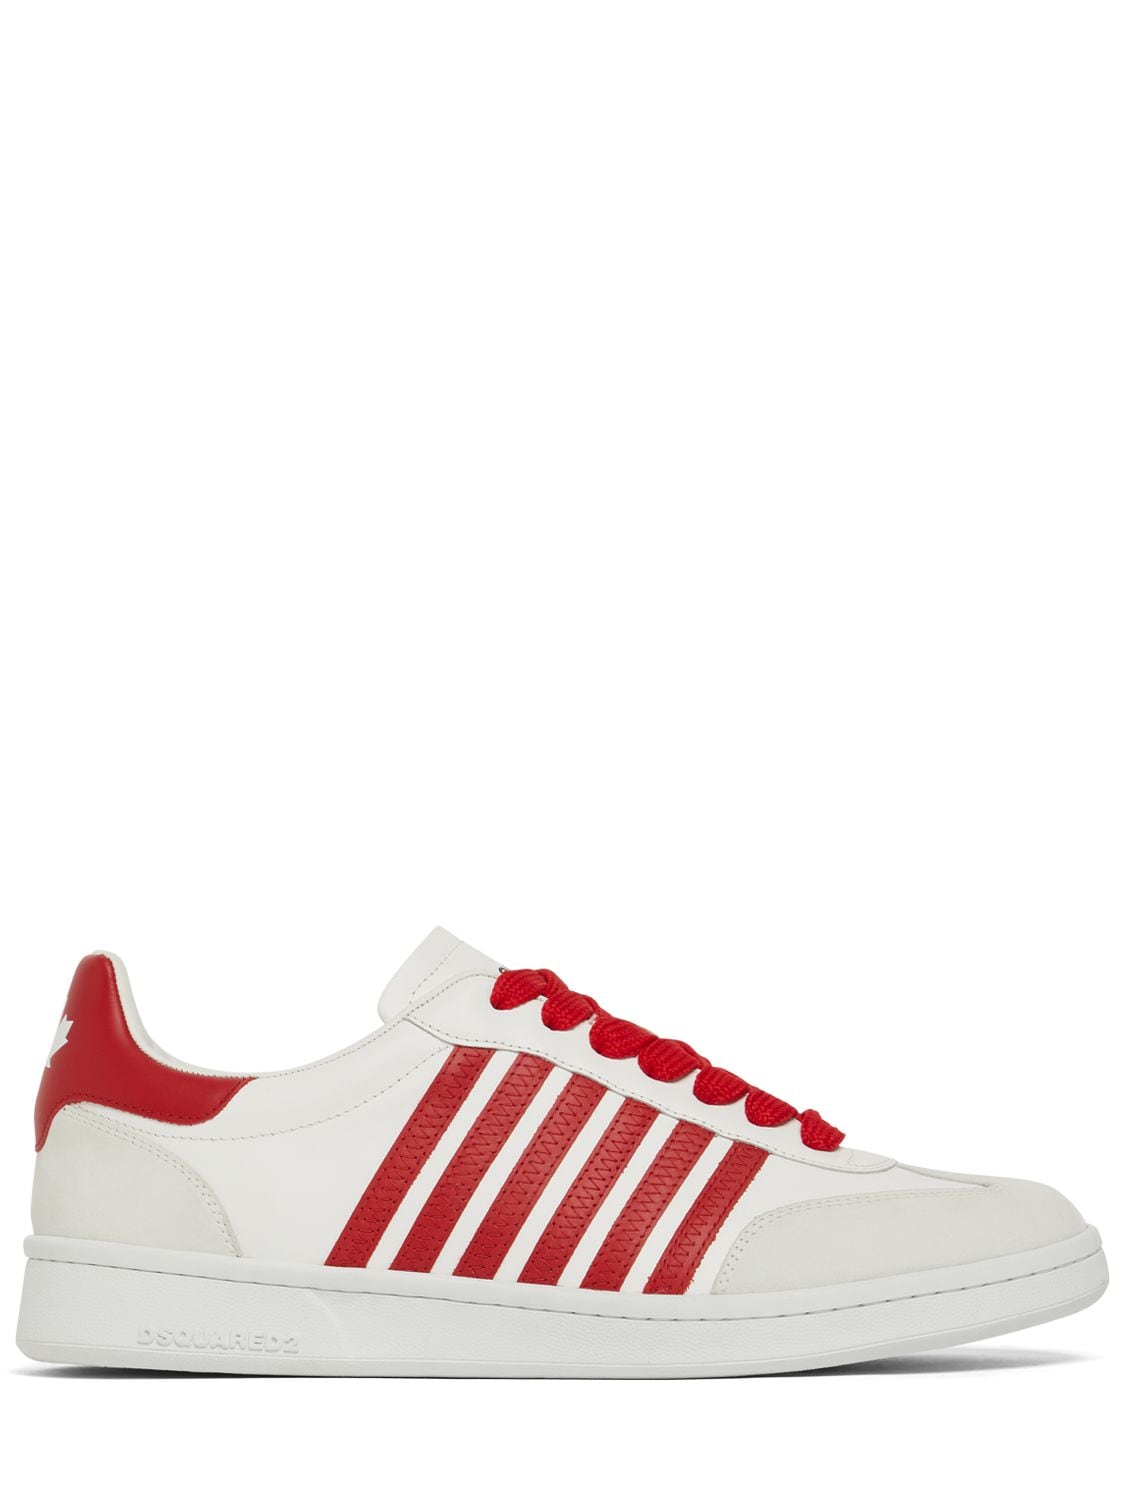 DSQUARED2 BOXER LEATHER LOW SNEAKERS